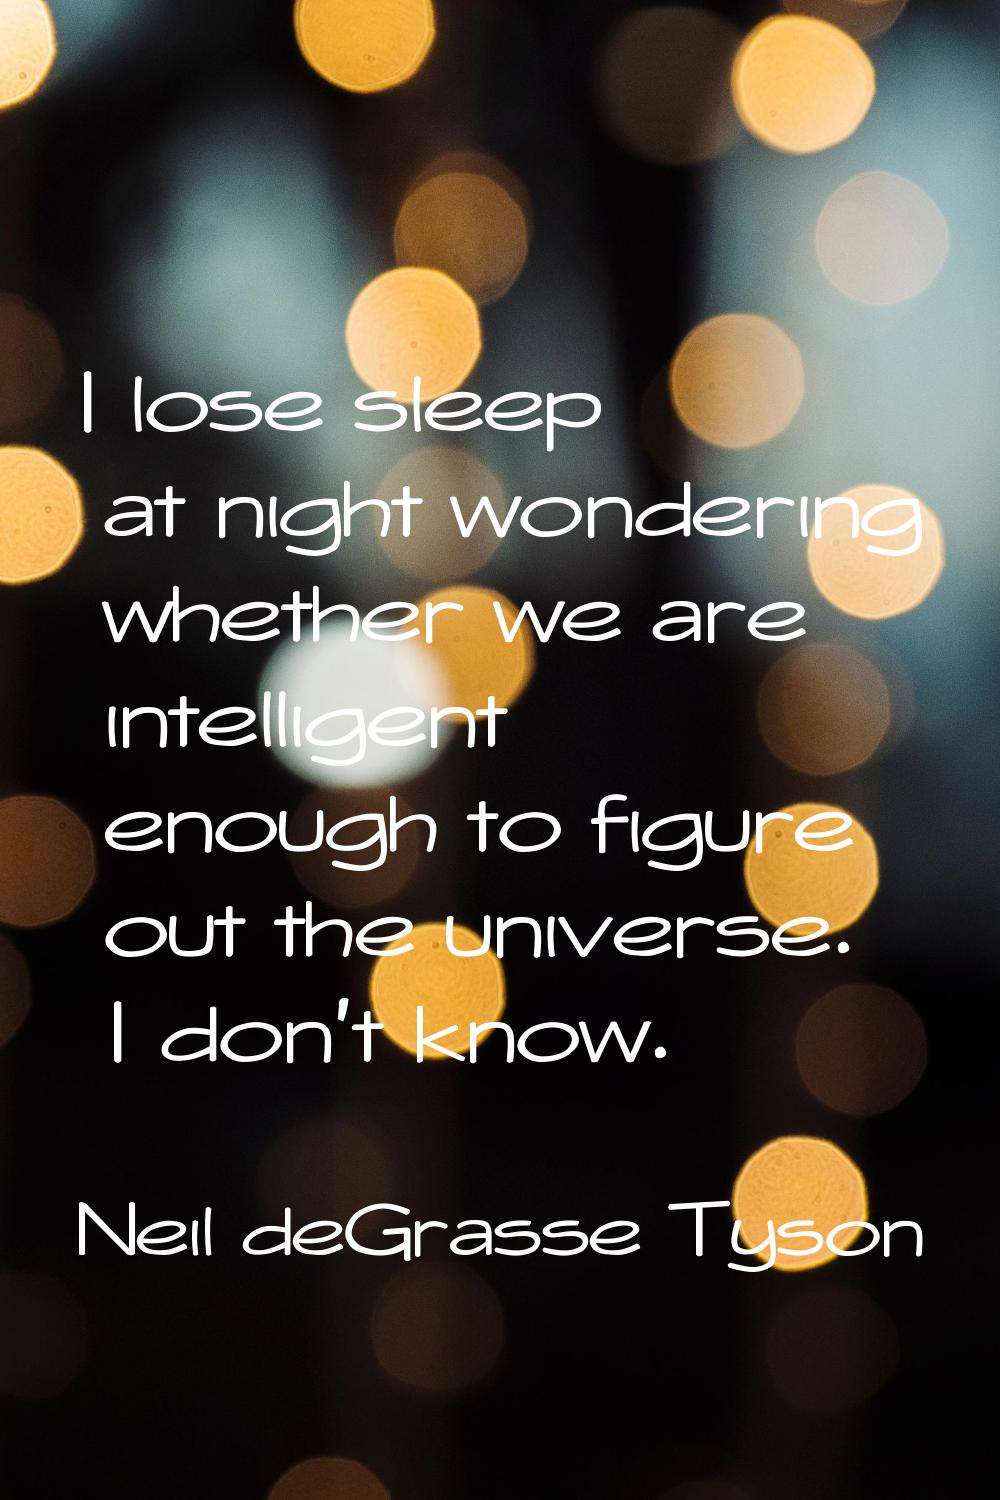 I lose sleep at night wondering whether we are intelligent enough to figure out the universe. I don